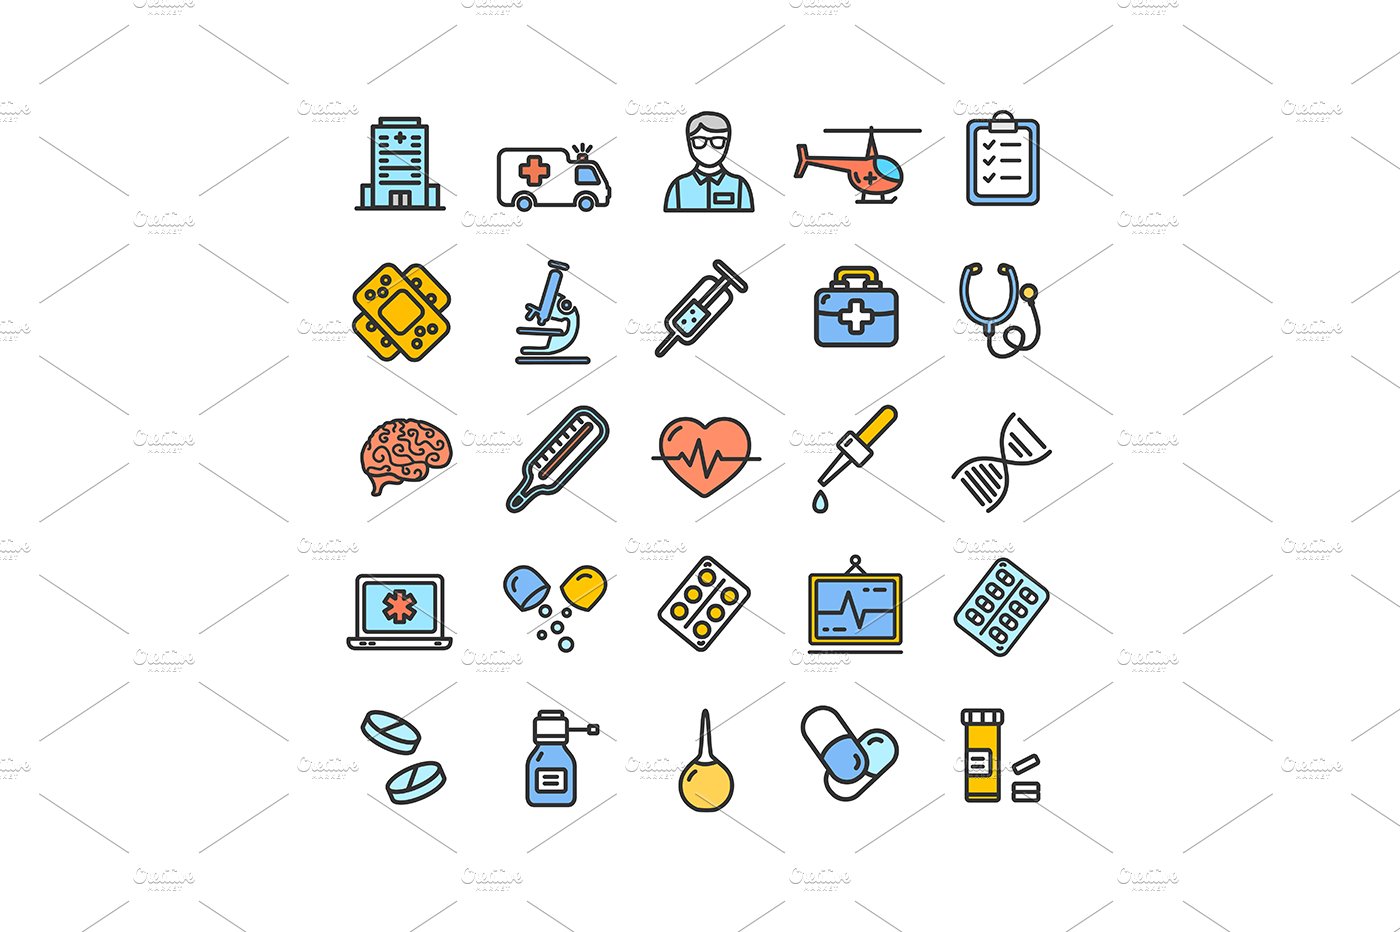 Medicine Symbols and Signs Icons cover image.